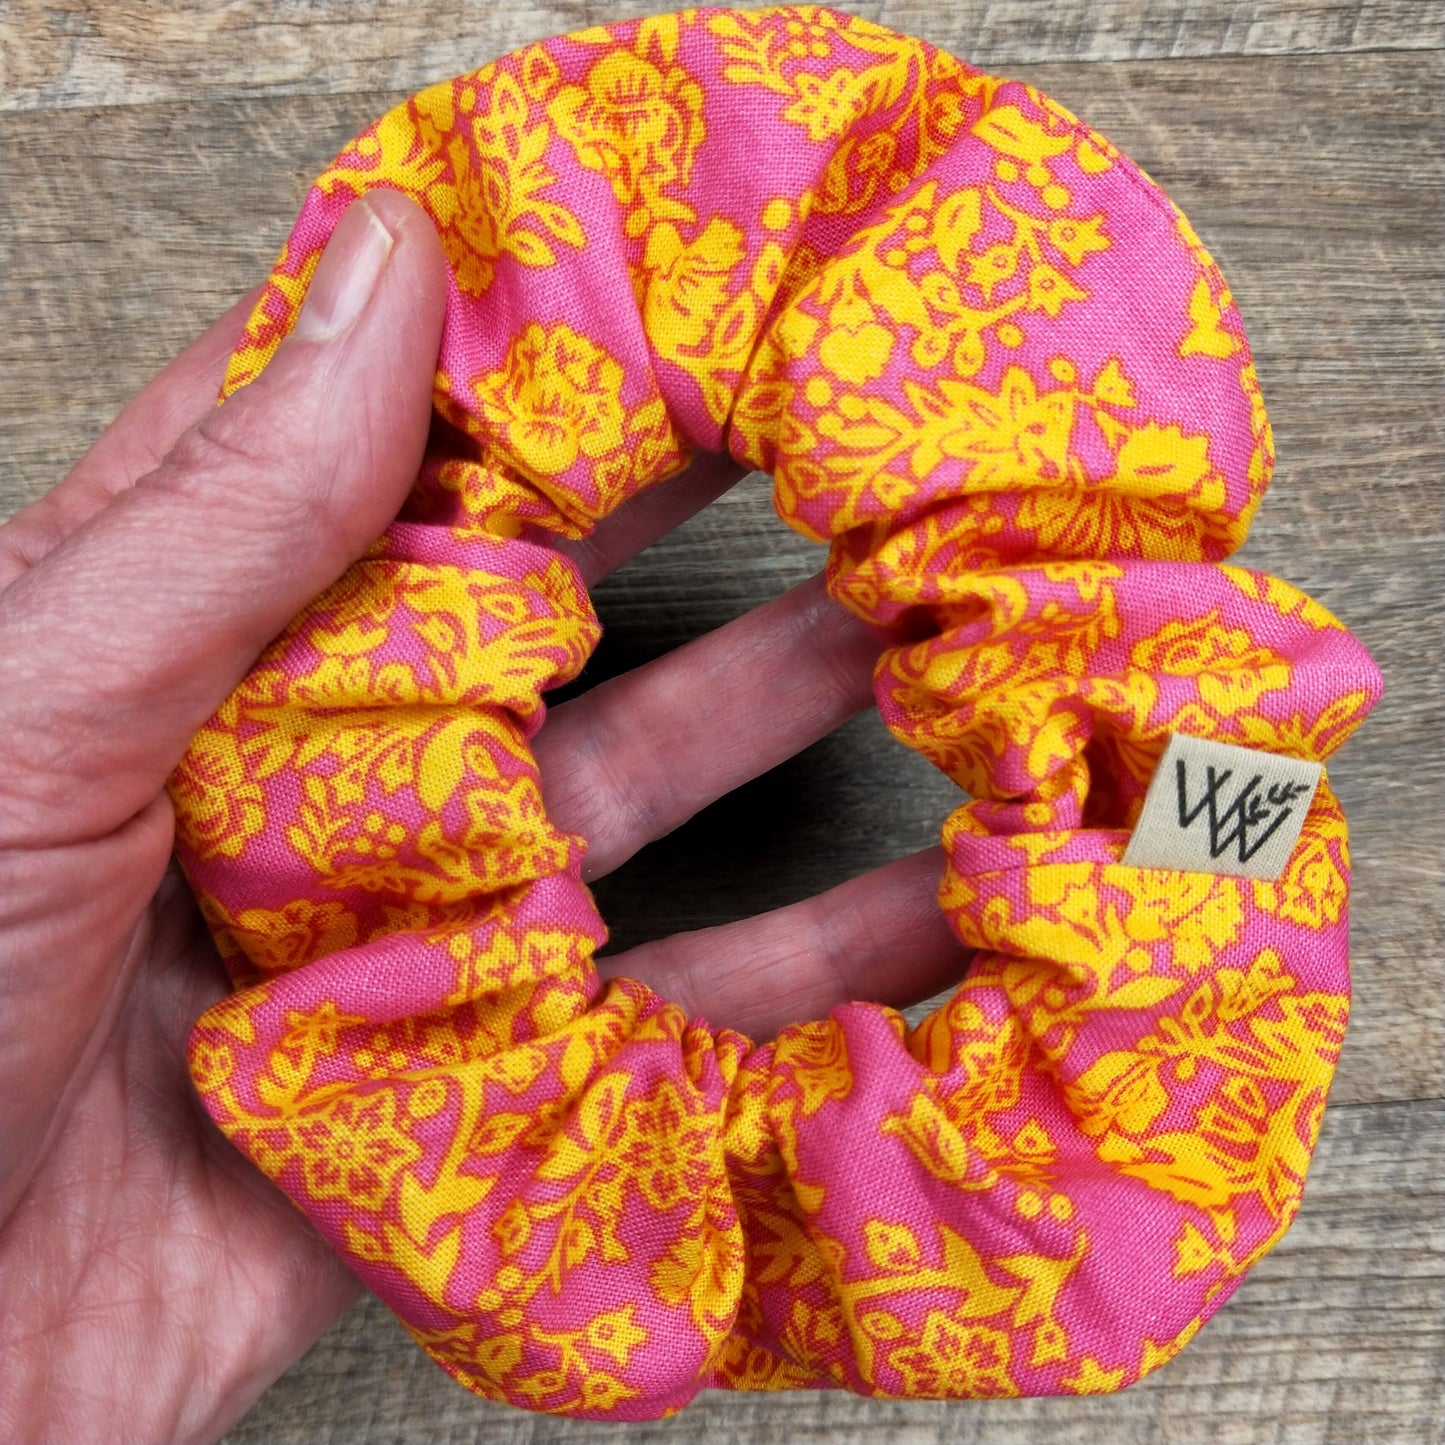 Scrunchies - Pink and Gold Floral